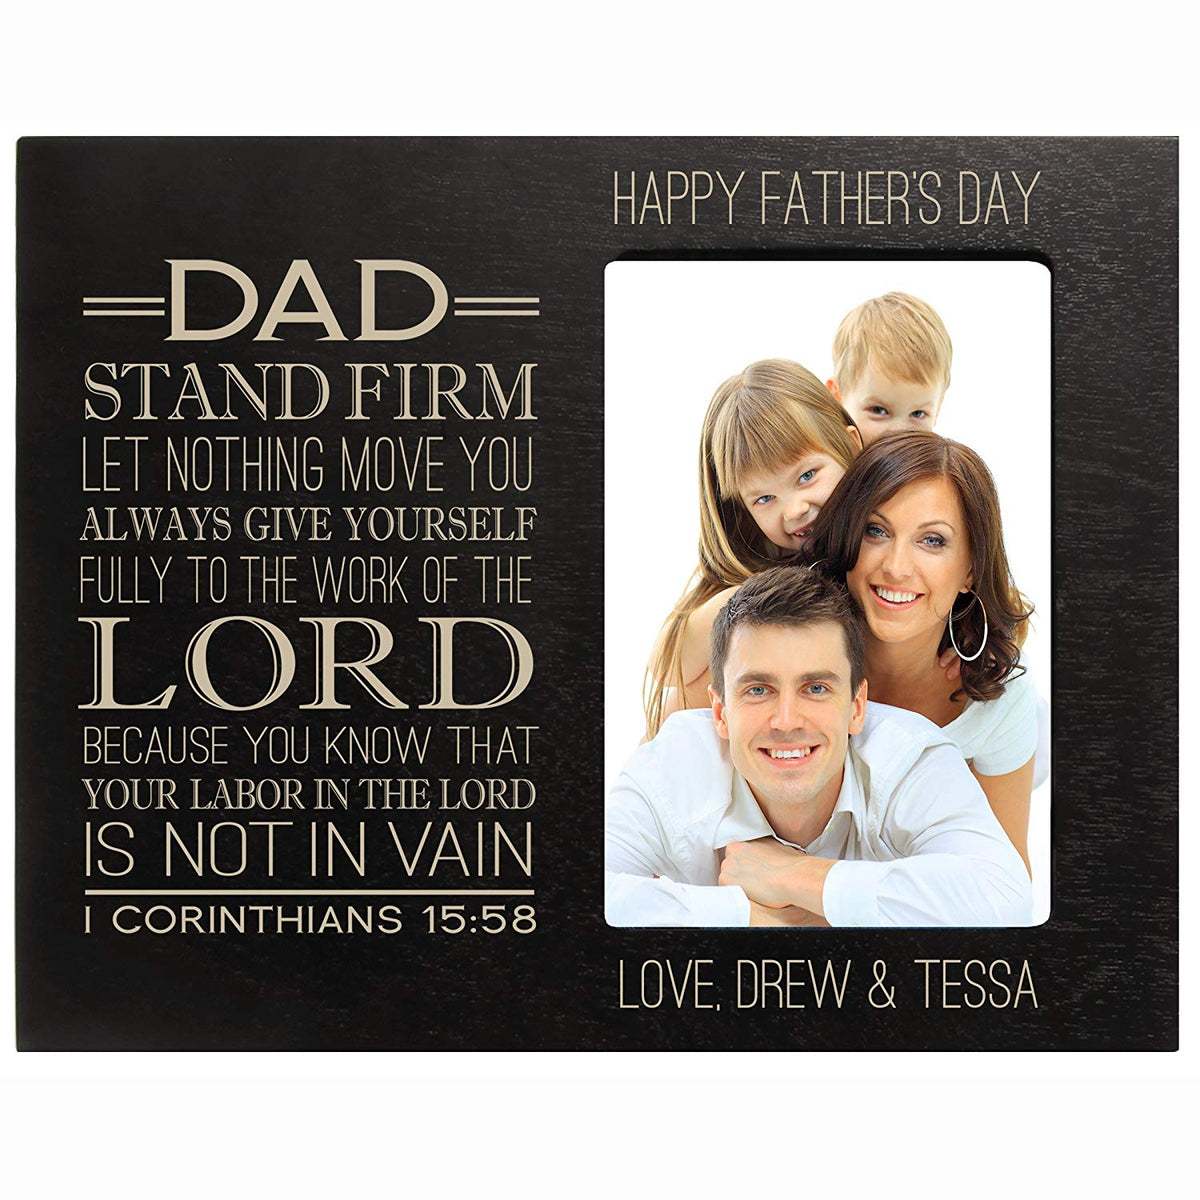 Personalized Happy Fathers Day Engraved Picture Frame - 1 Corinthians 15:58 - LifeSong Milestones